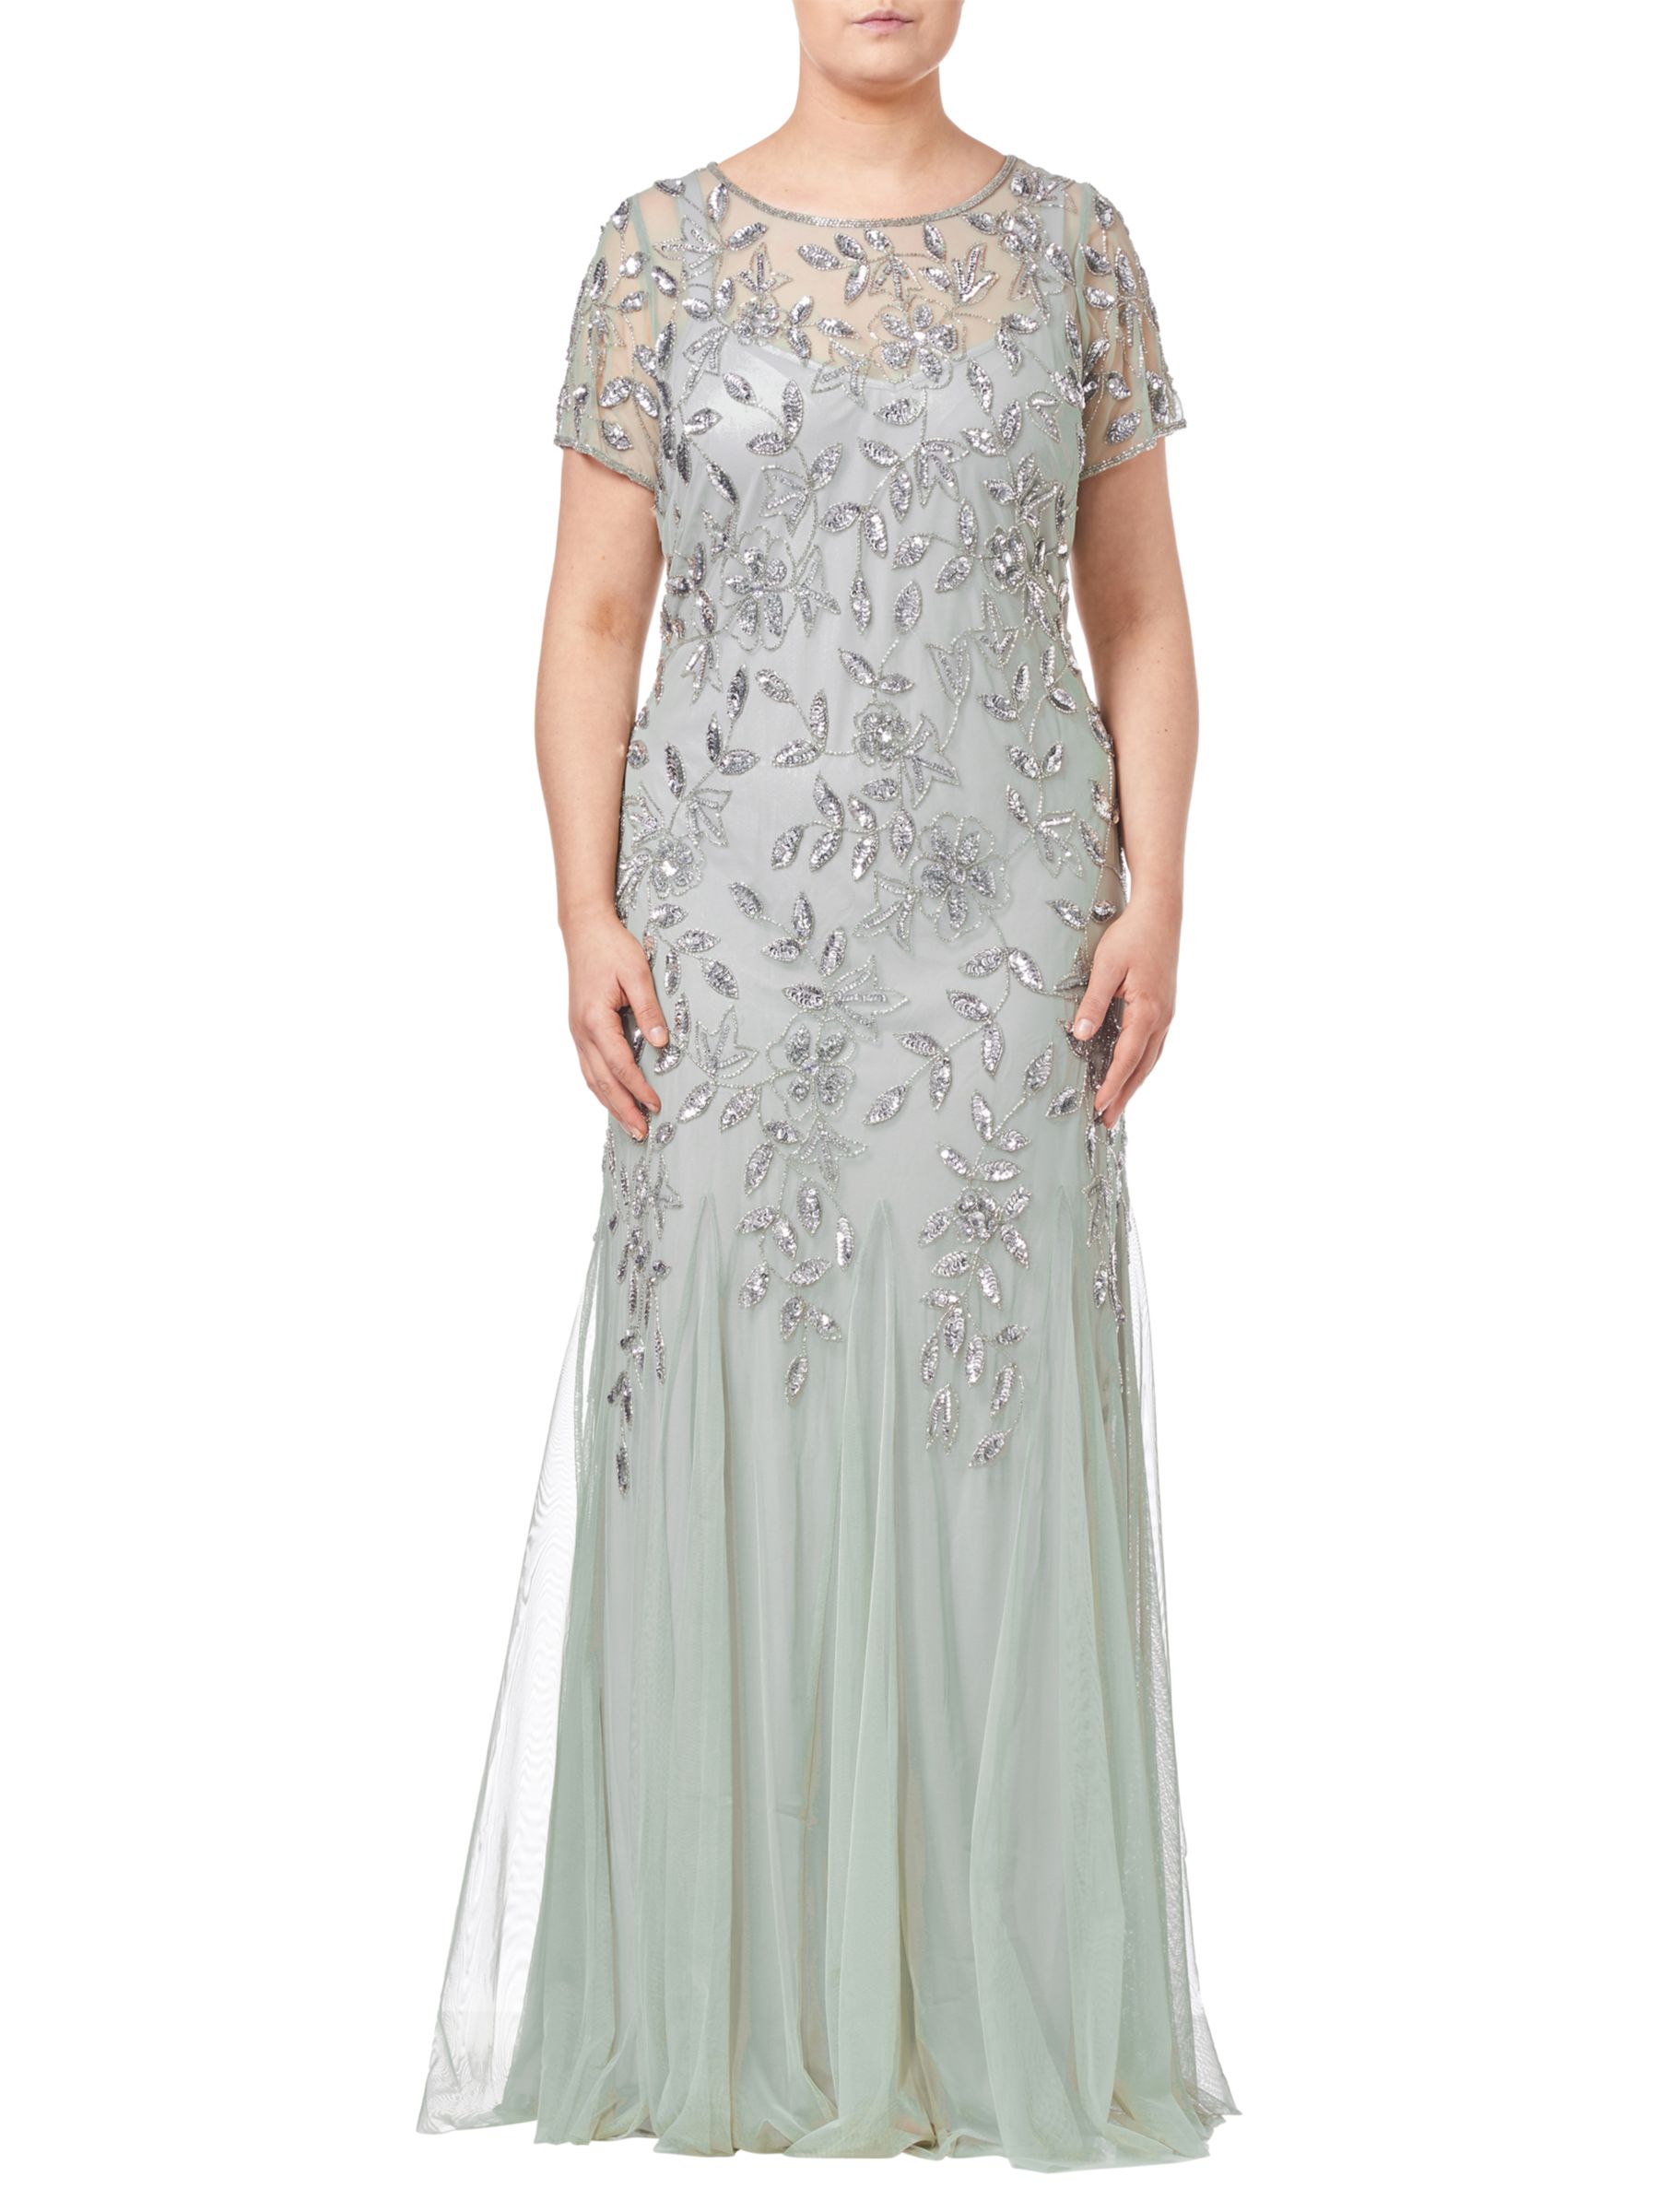 adrianna papell beaded godet gown